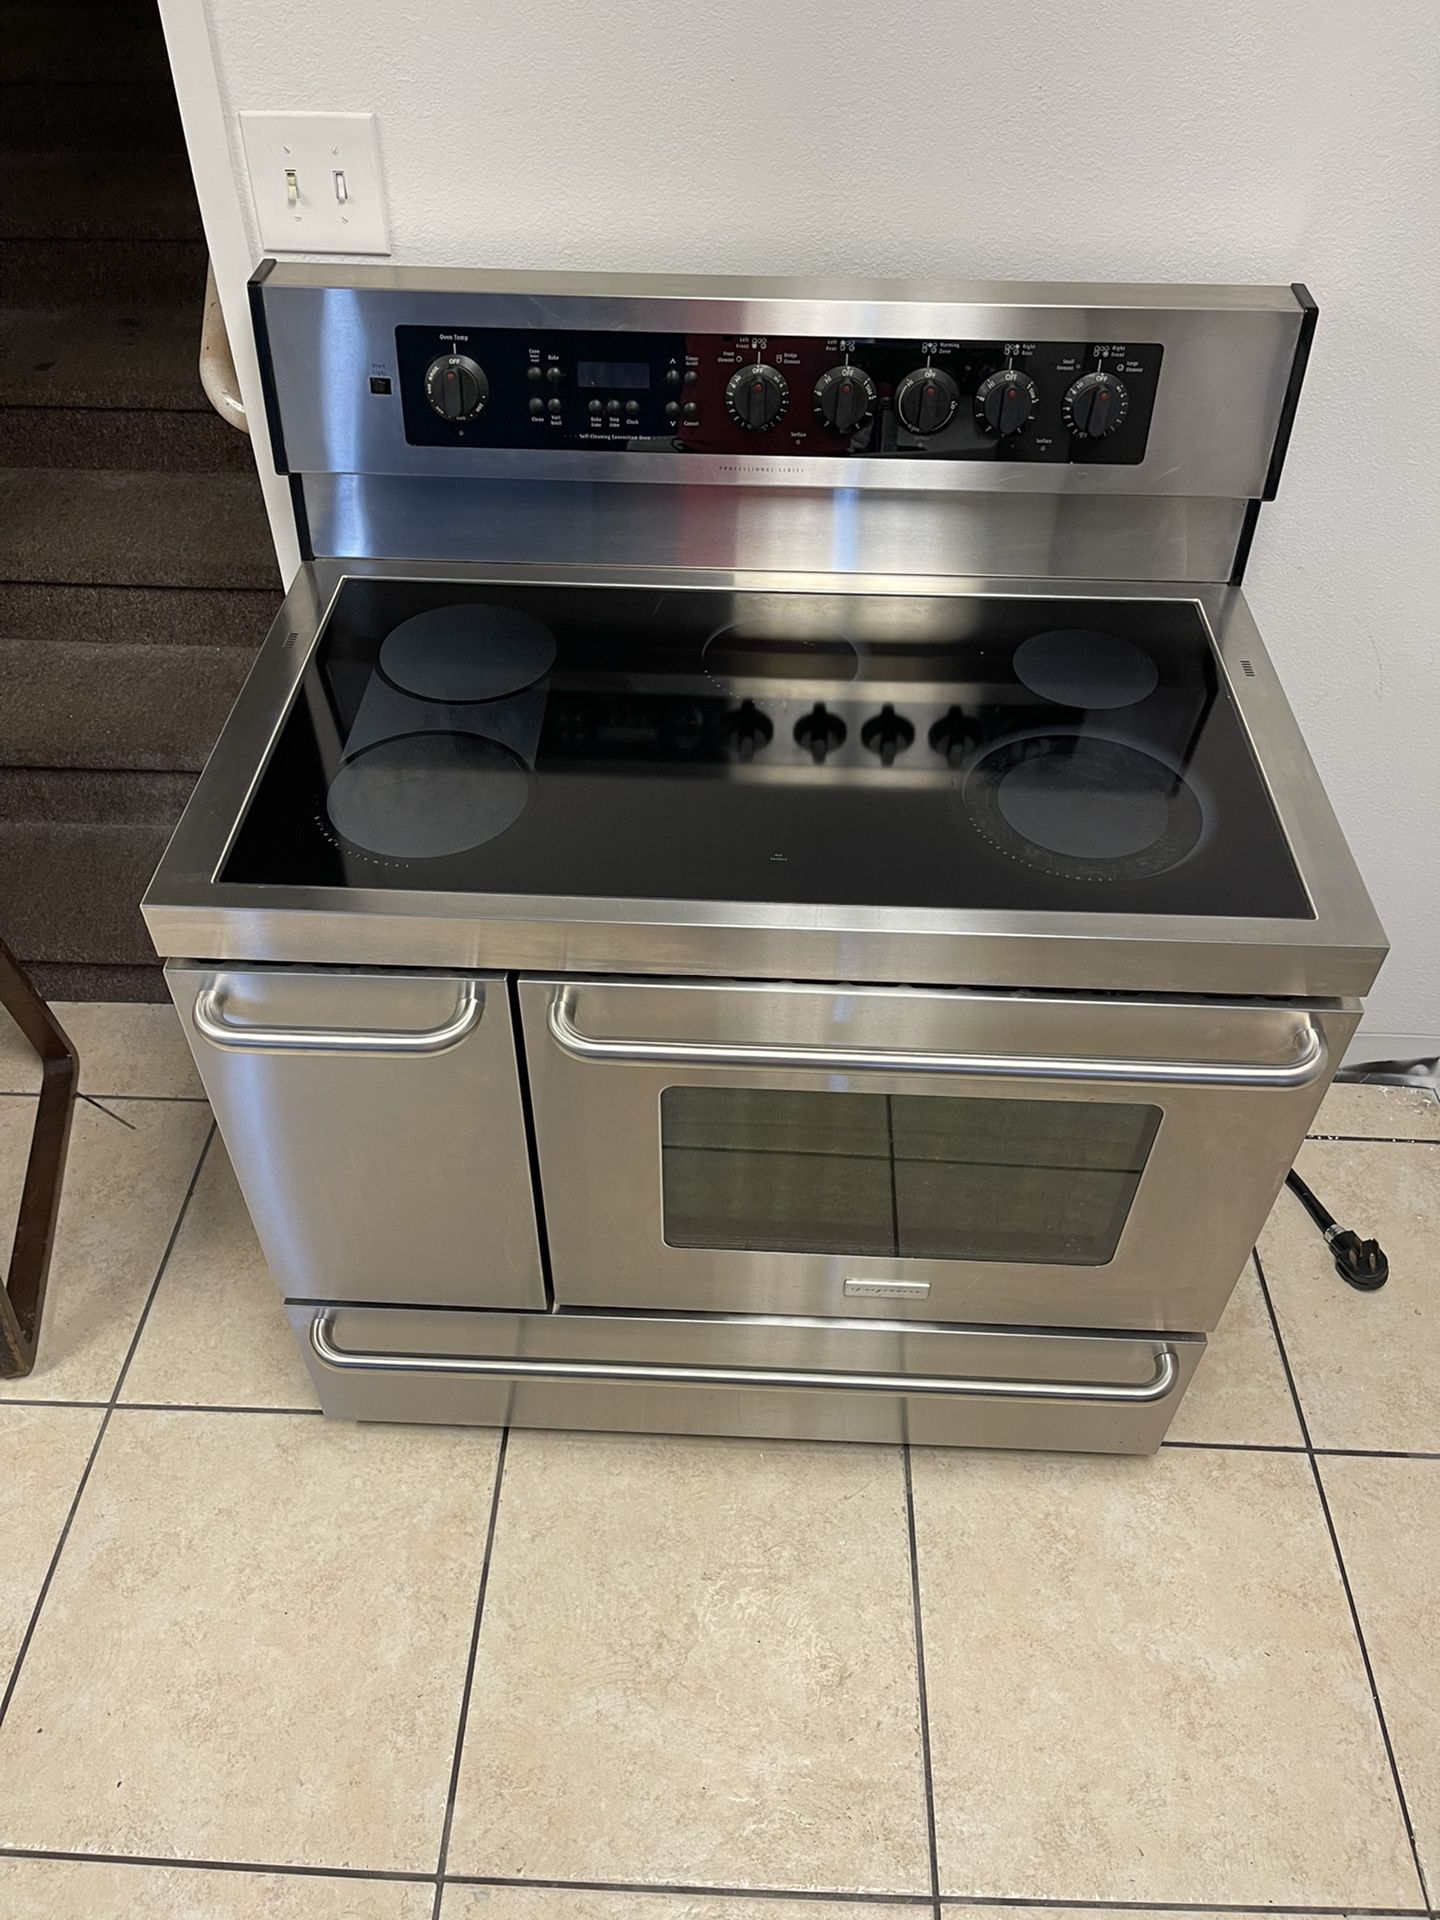 Frigidaire Professional 40” Electric Range for Sale in Orlando, FL - OfferUp